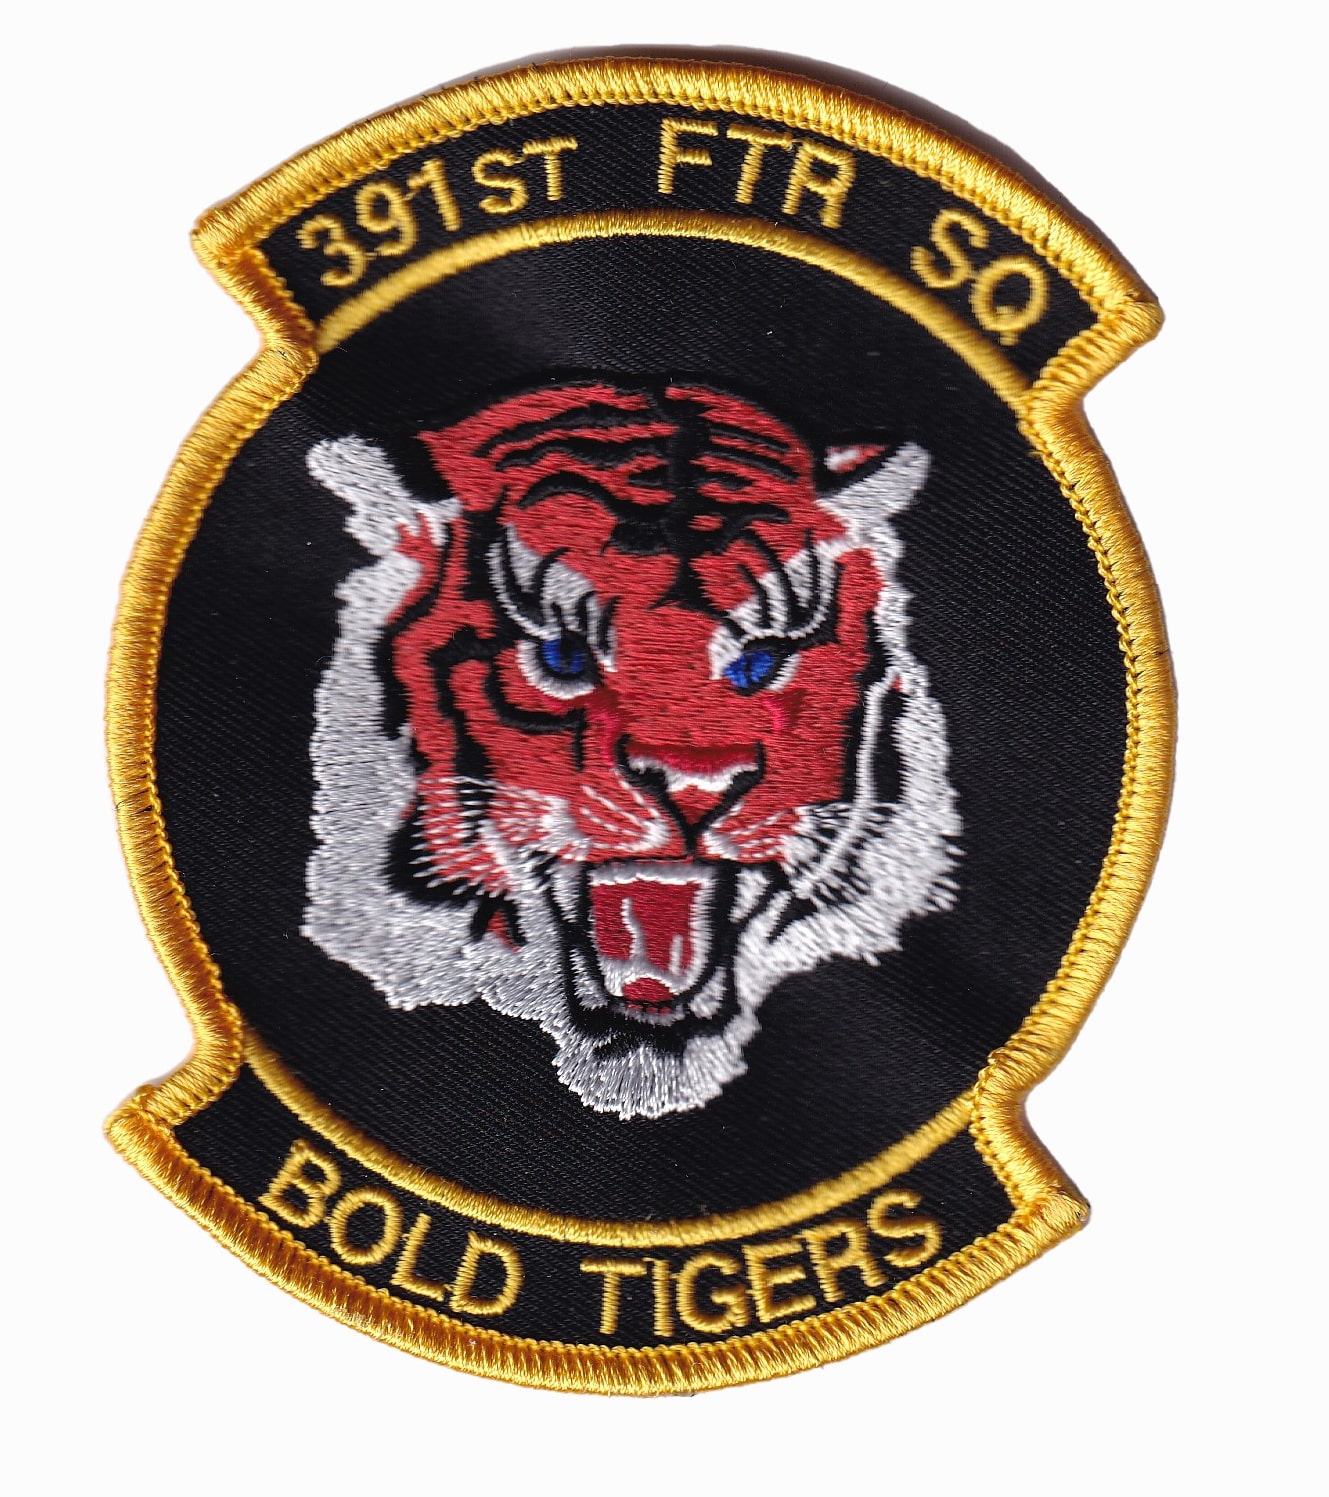 391st Fighter Squadron Patch - Plastic Backing, 4"